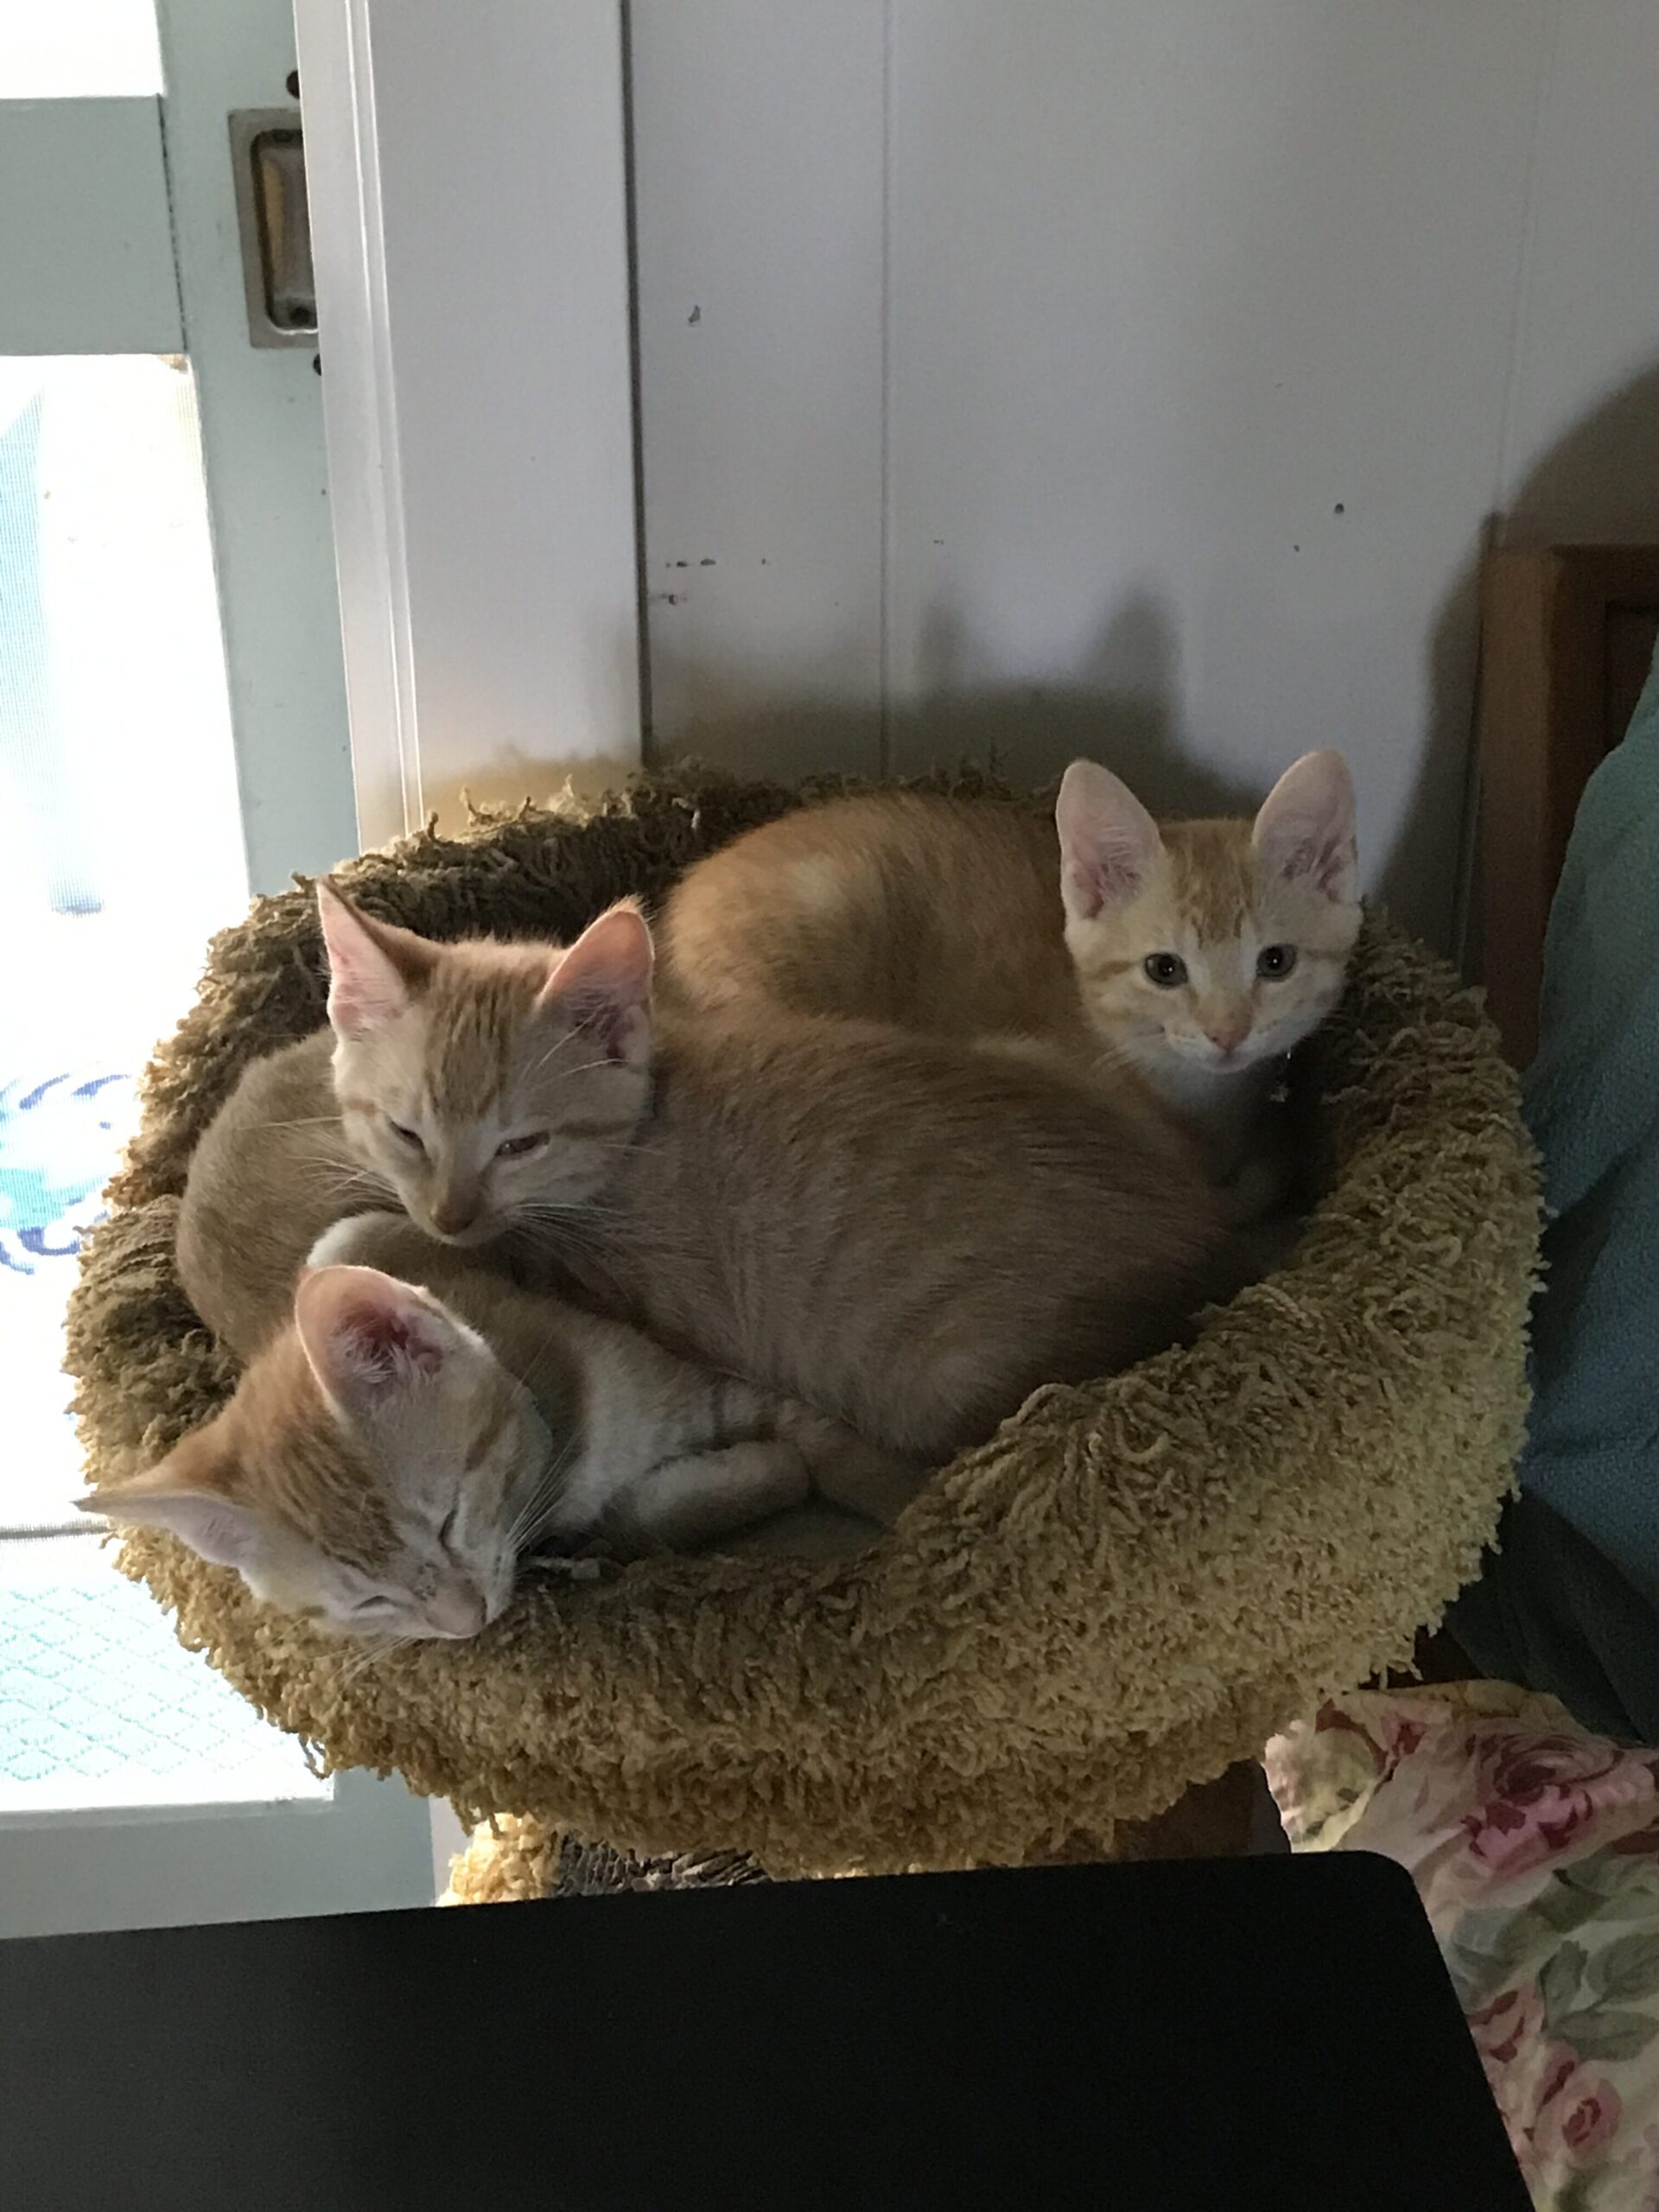 Three Little Kittens, snuggled together